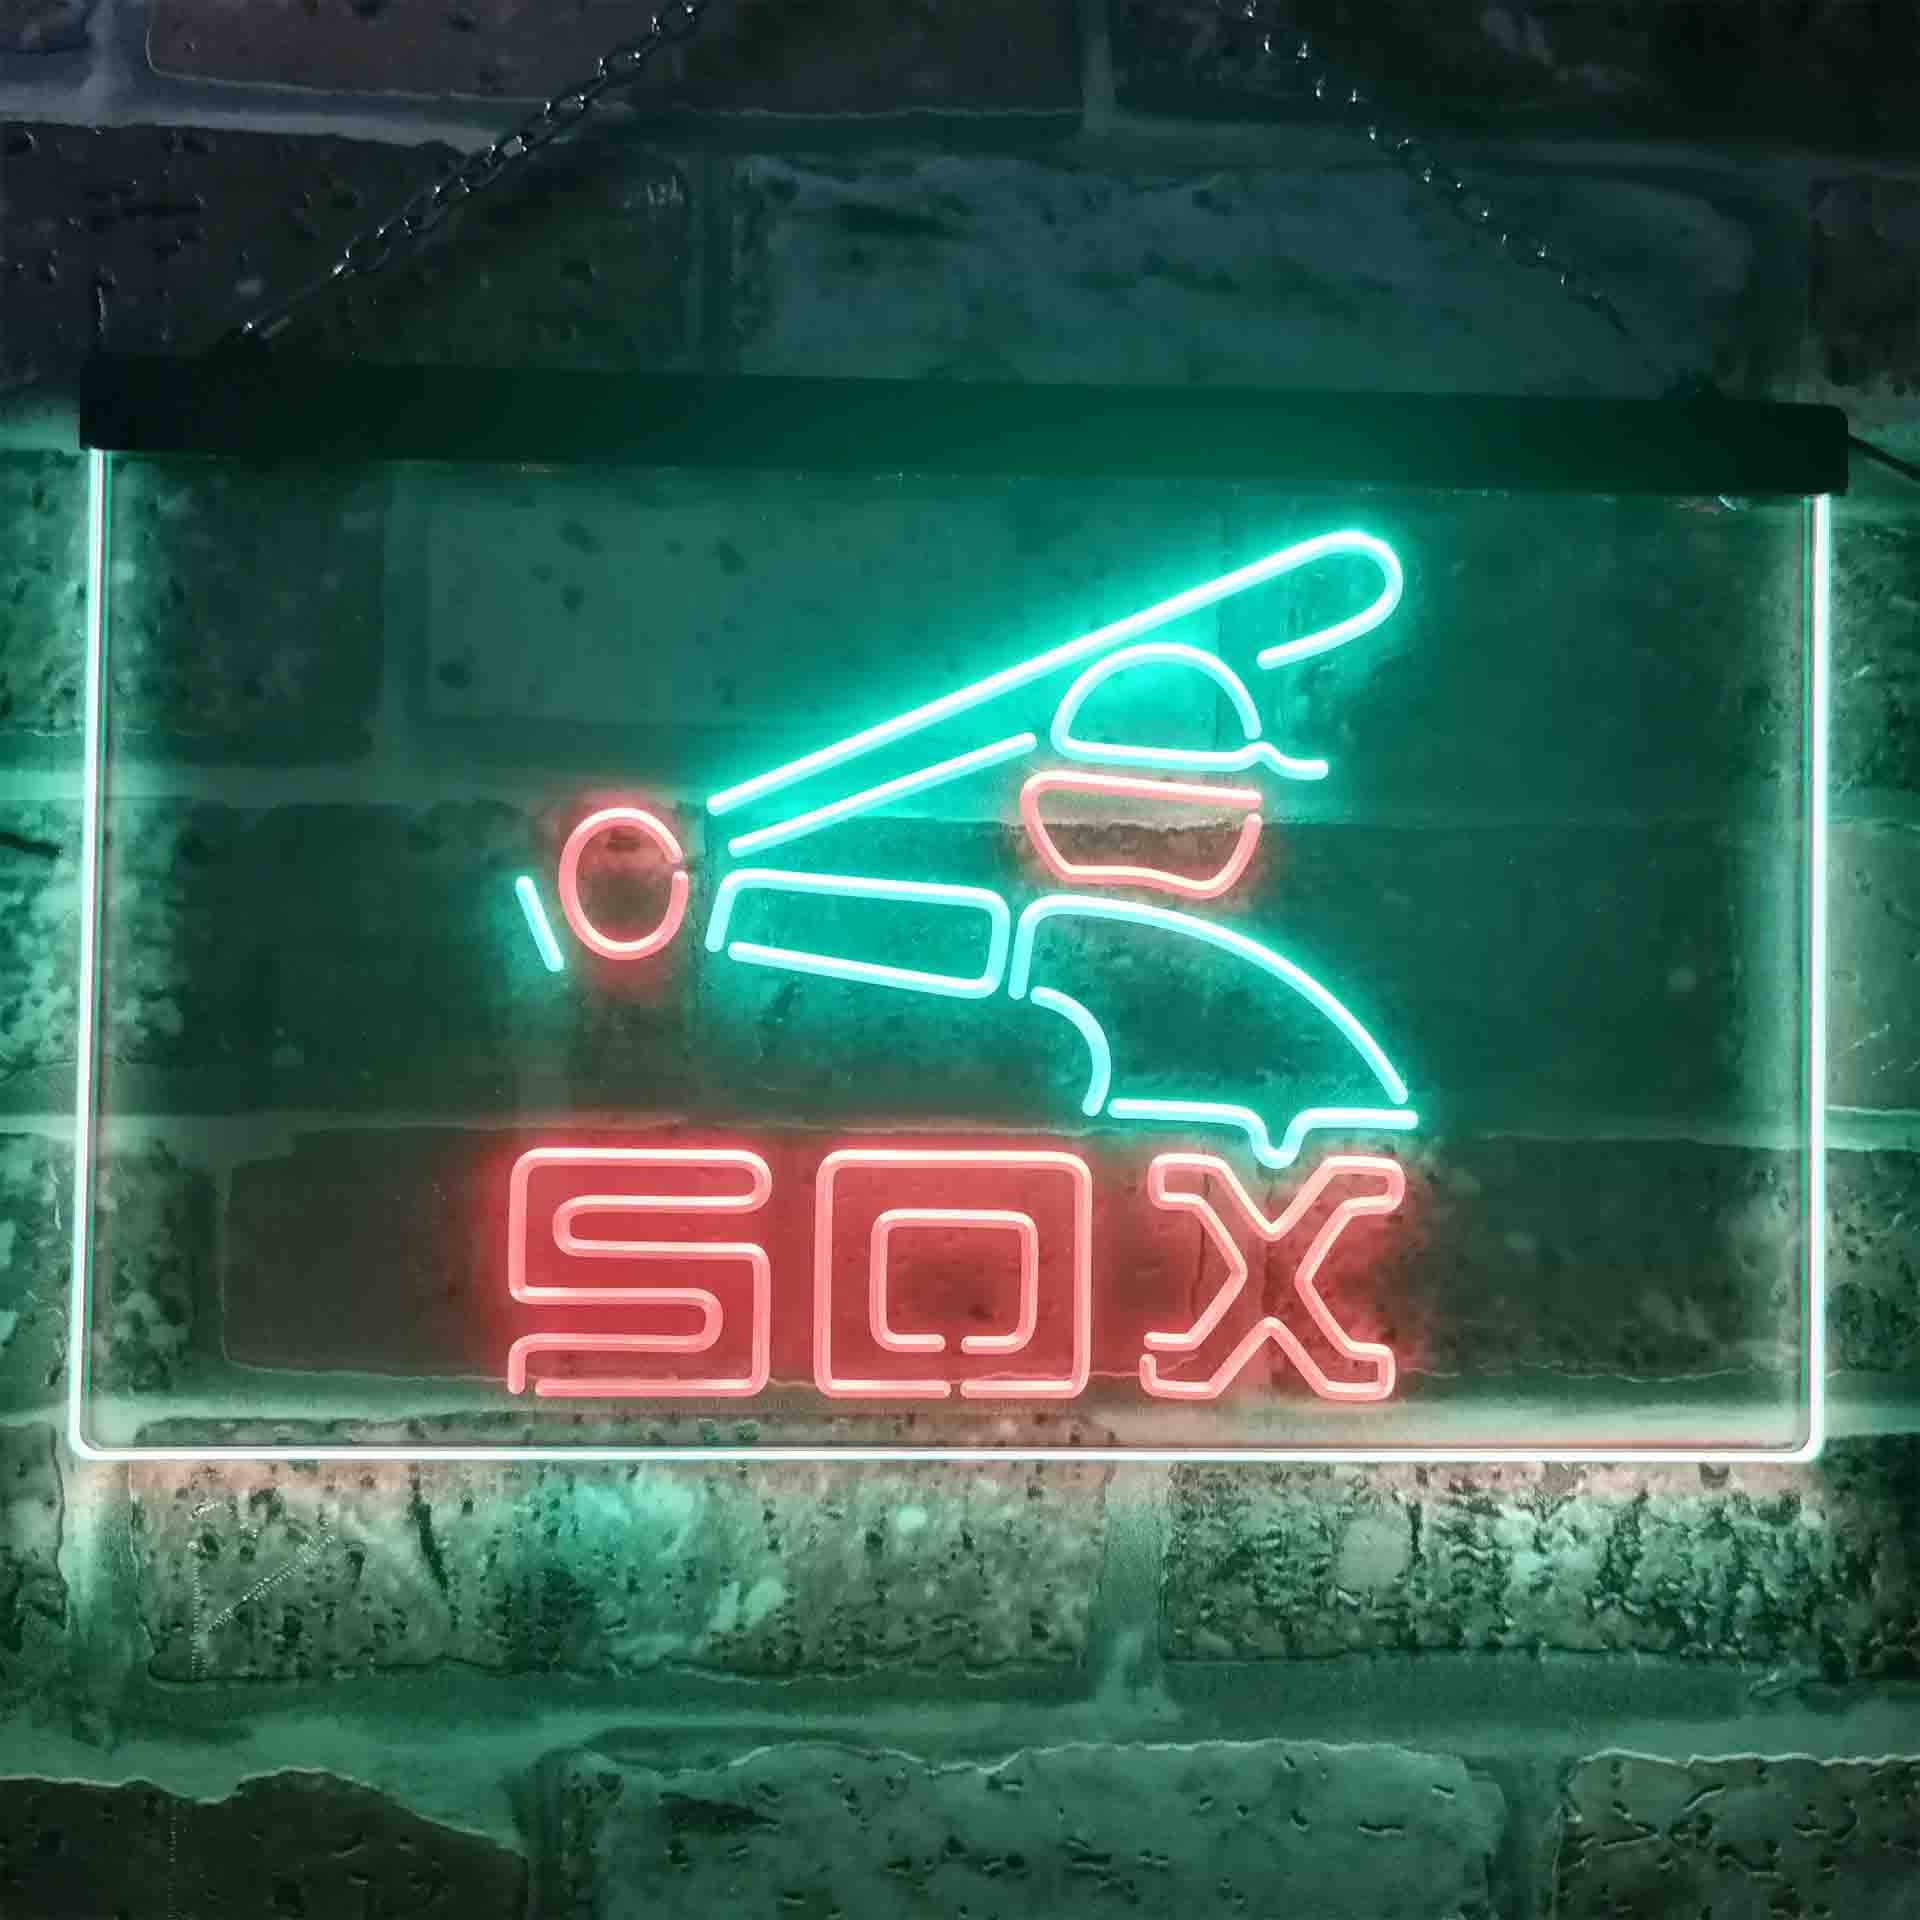 Chicago Sport Team 80s Throwback Neon LED Sign